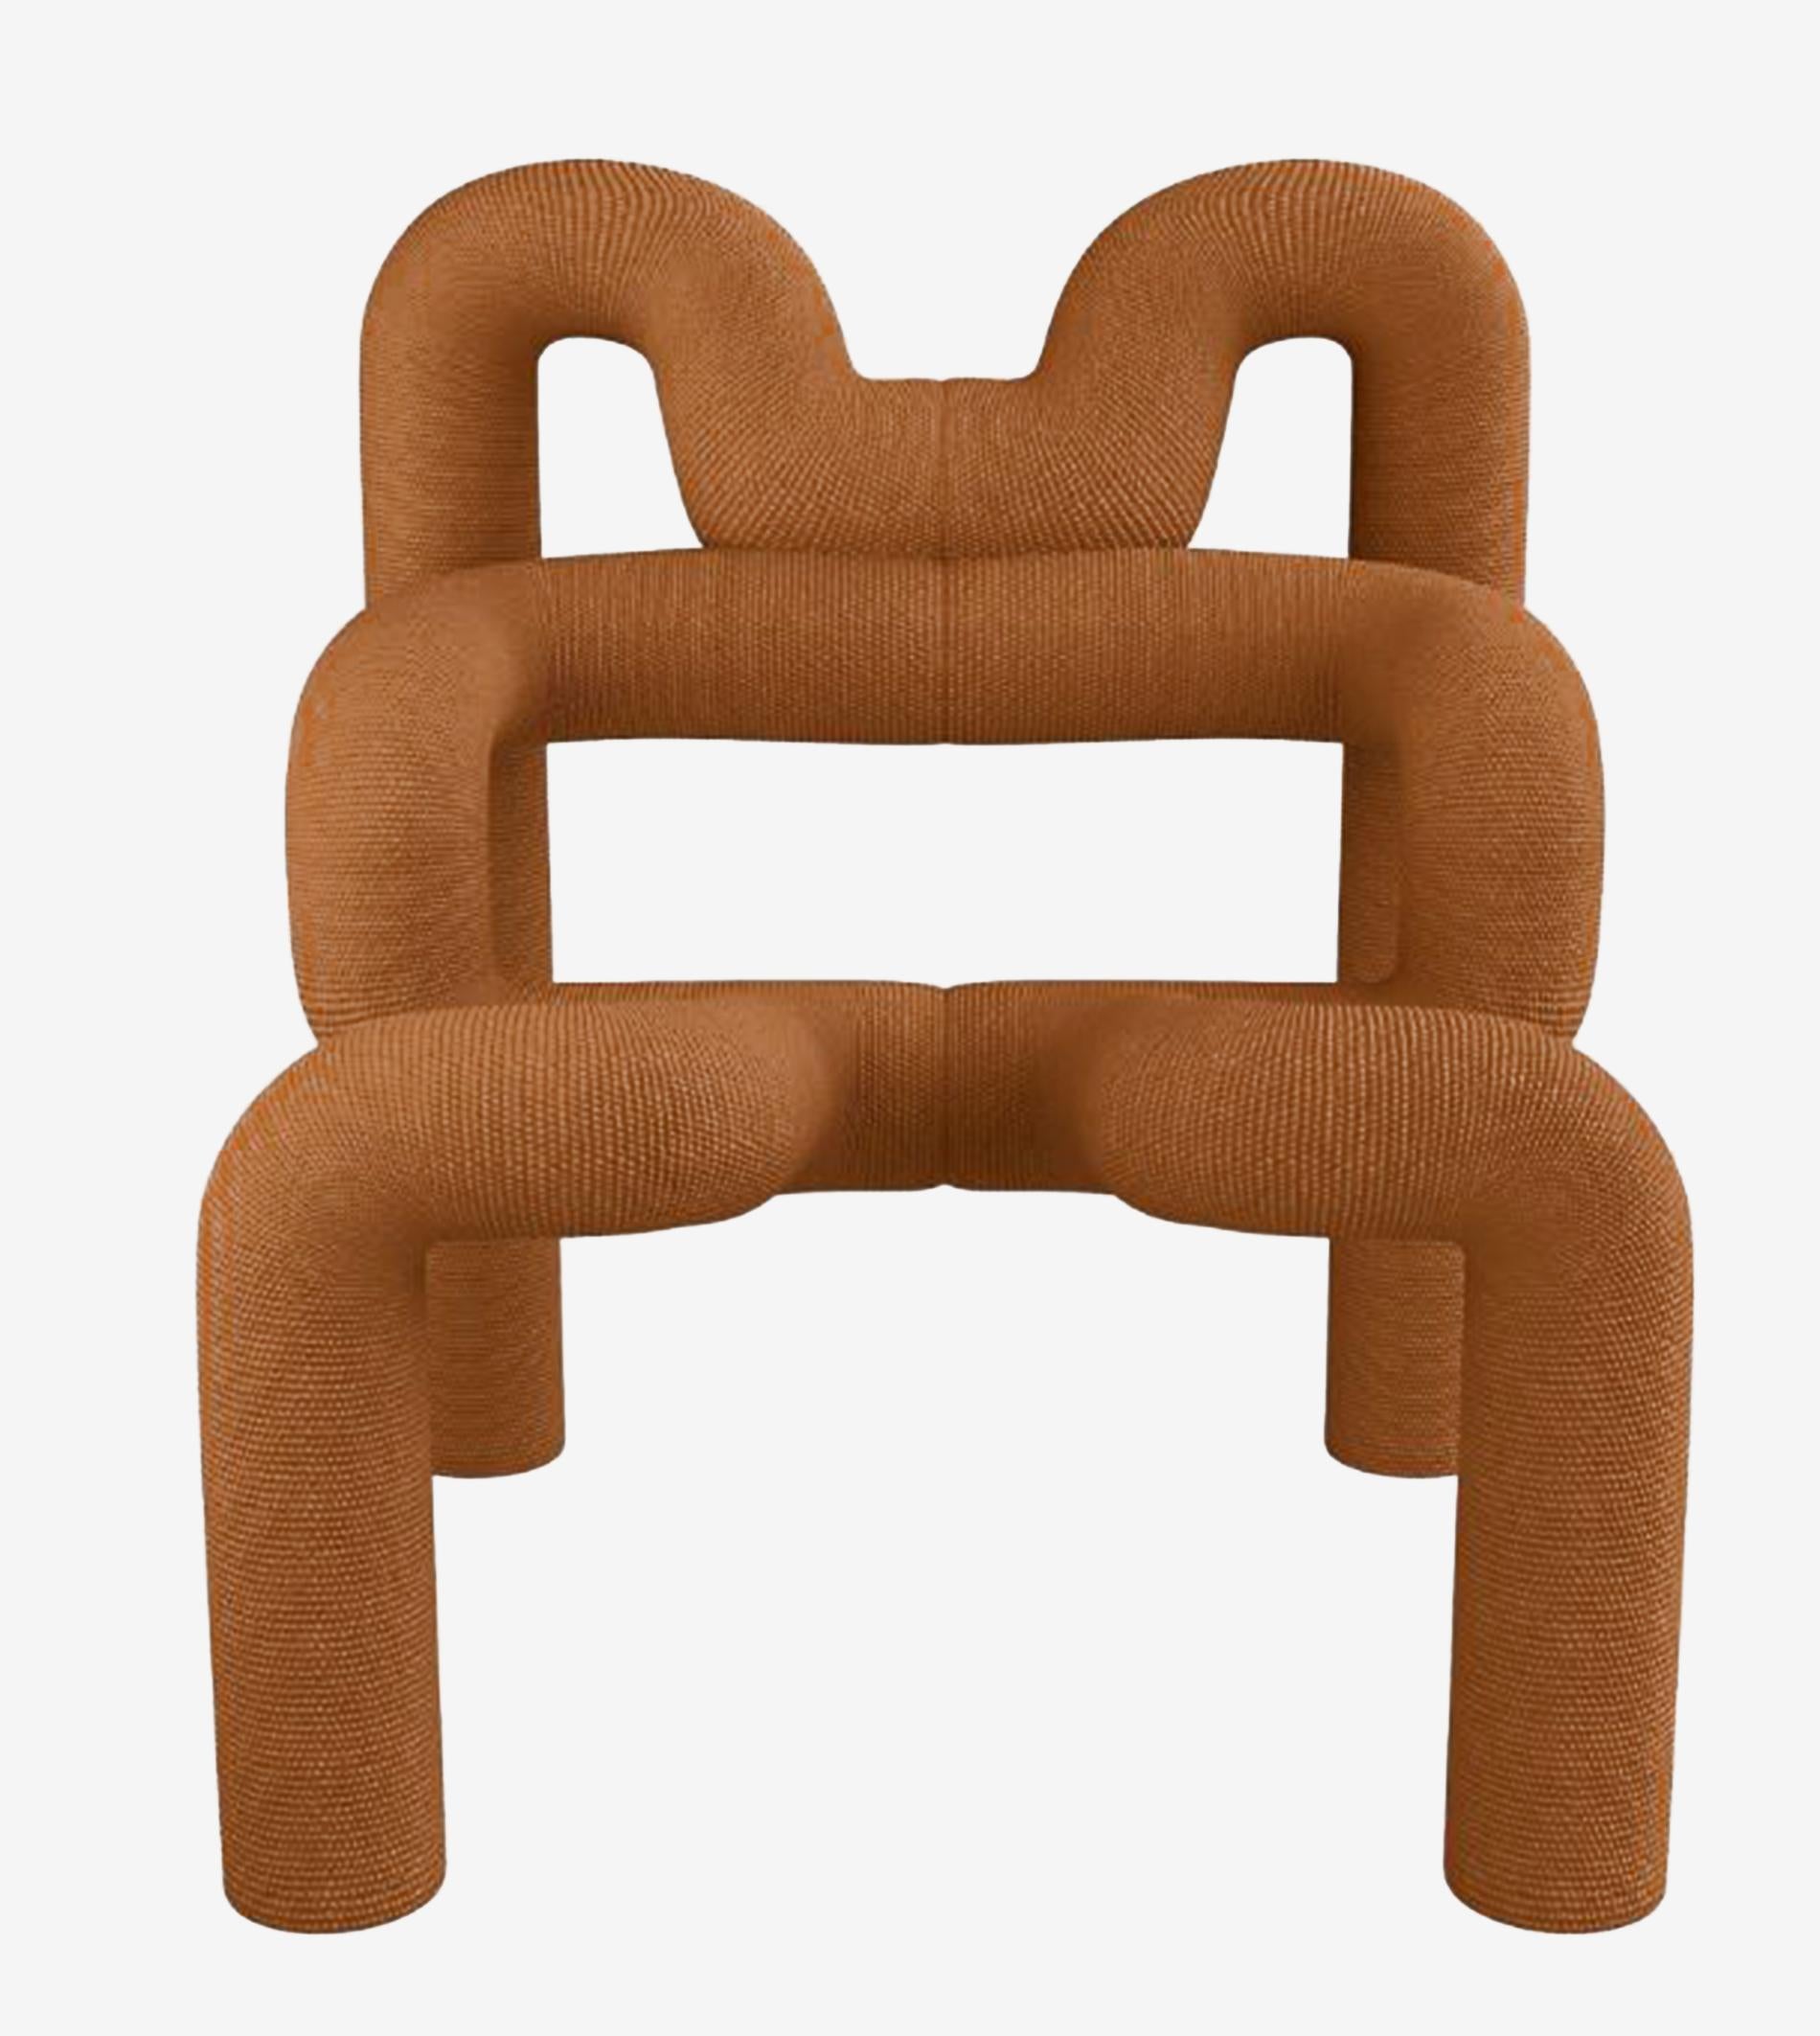 Other Iconic Burned Orange Armchairs by Terje Ekstrom, Norway, 1980s